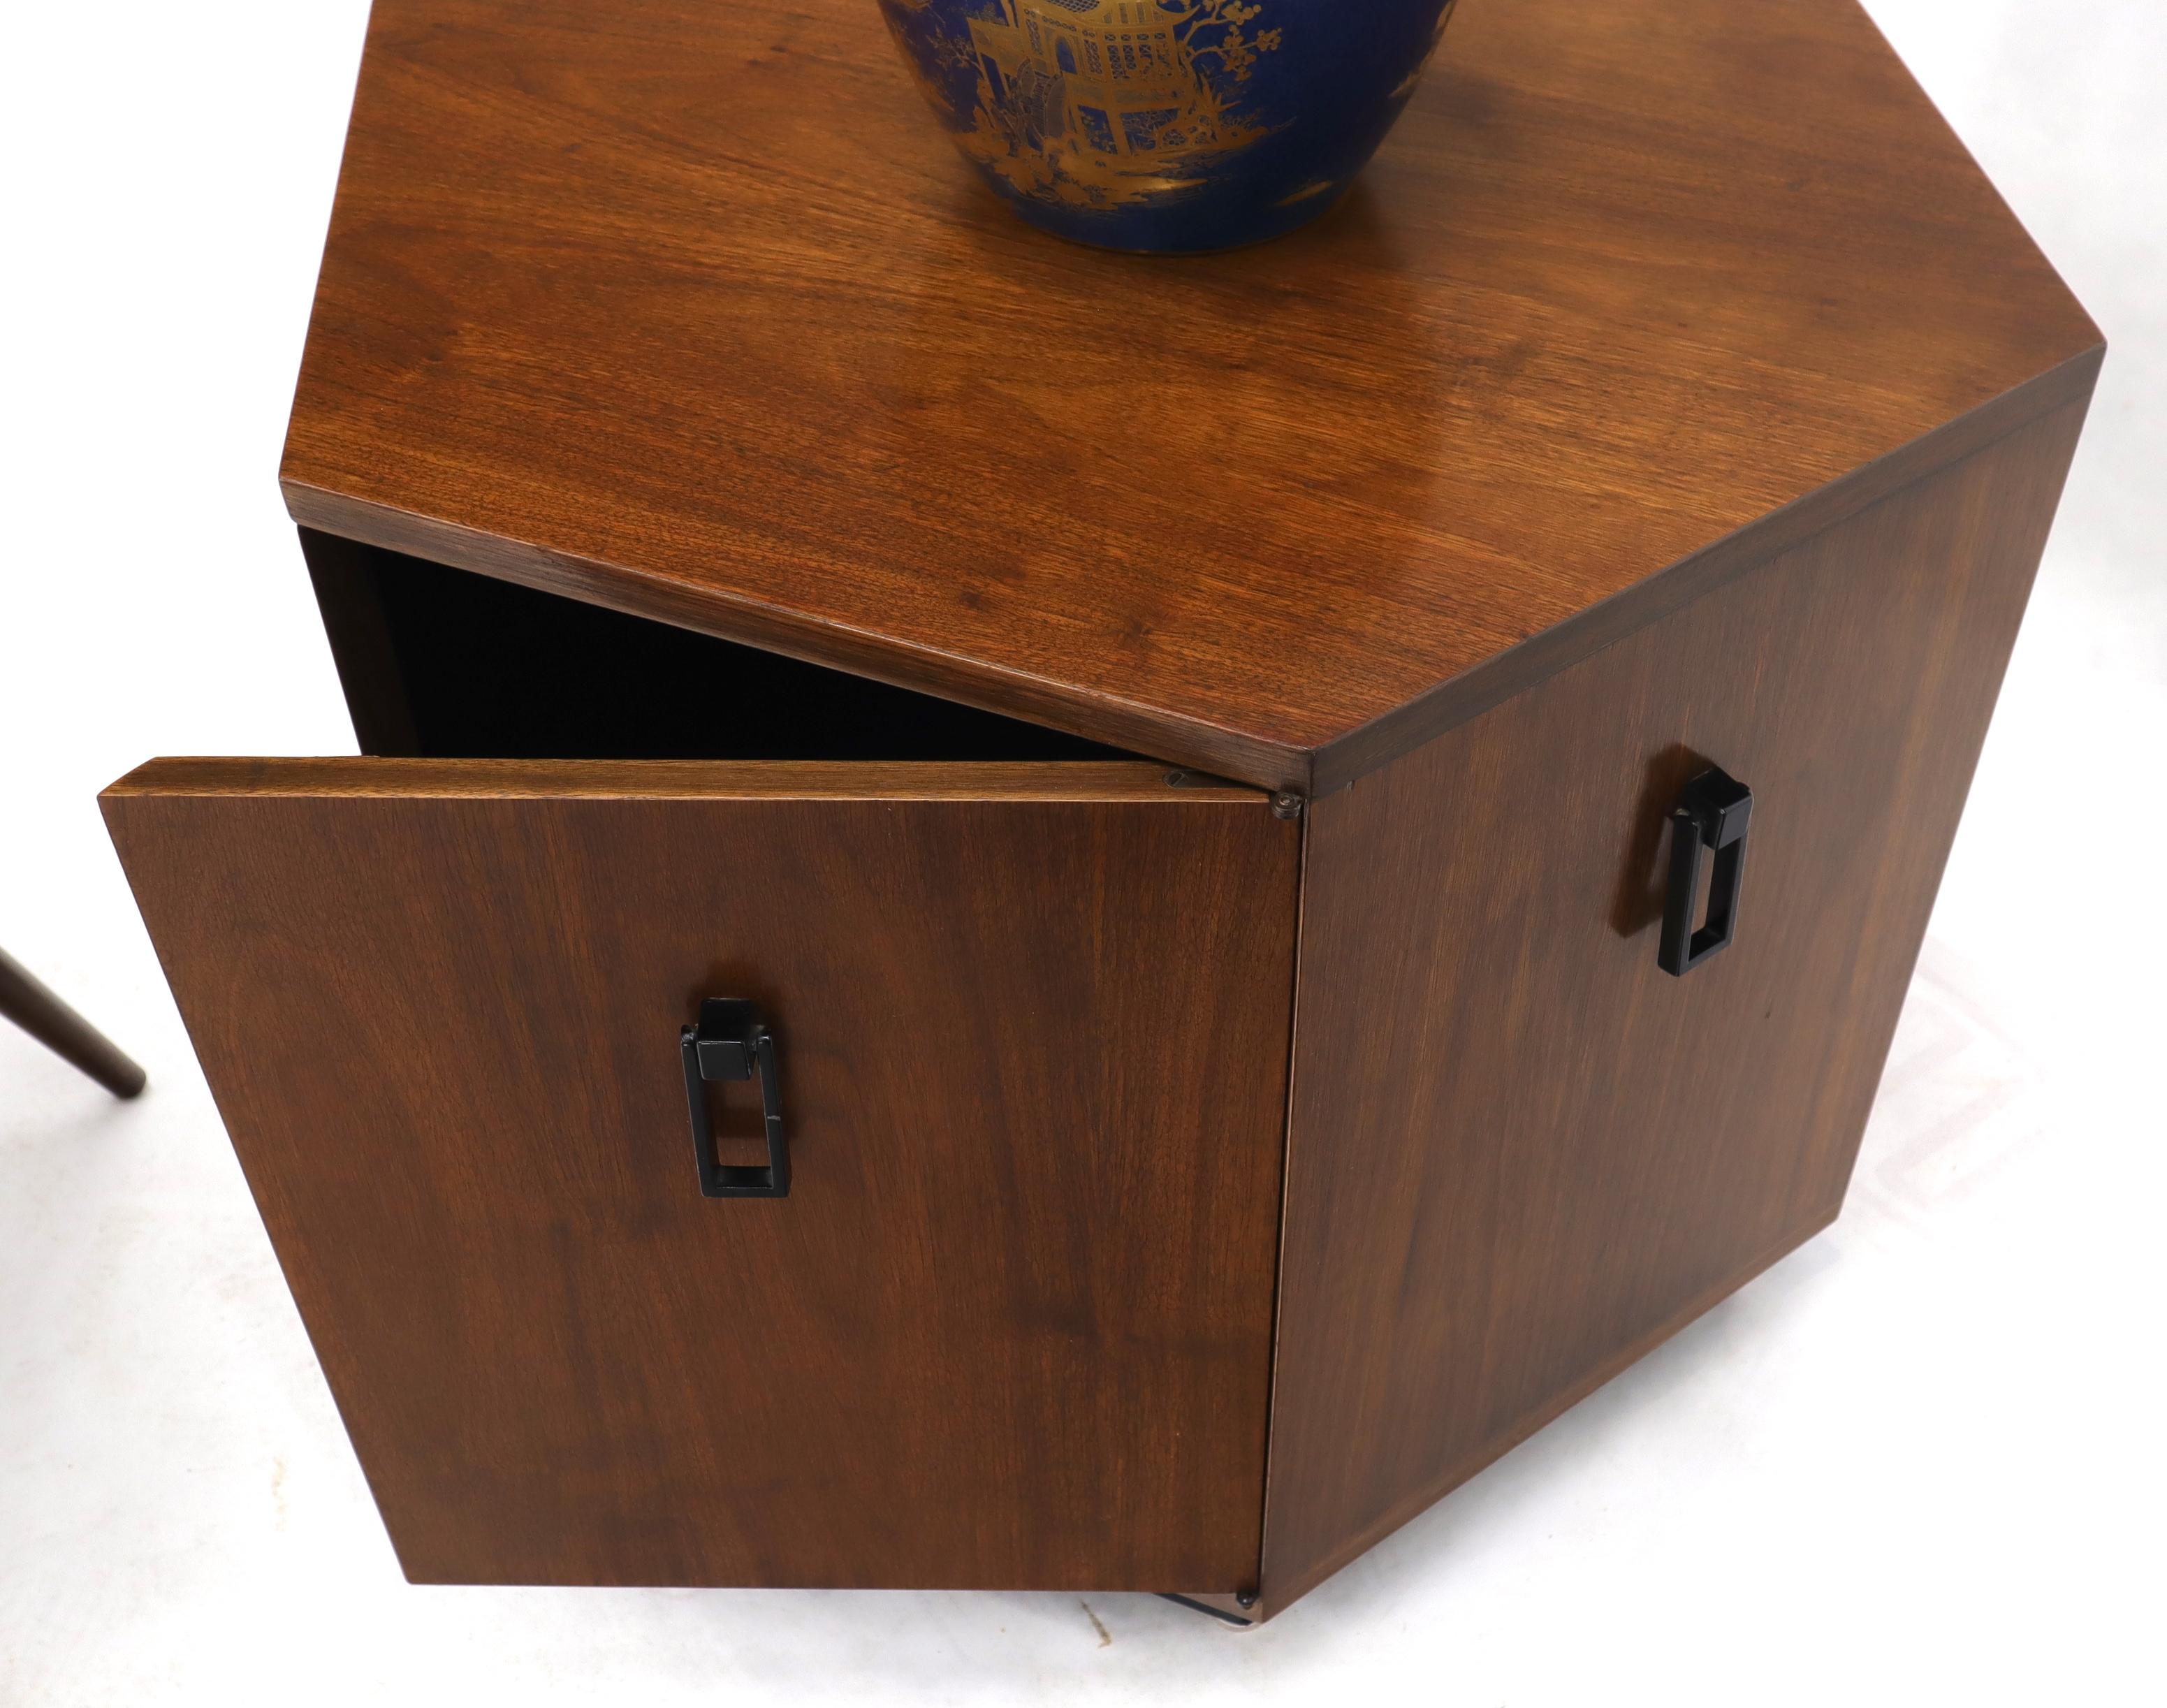 Walnut Hexagon Shape Drop Pulls Cabinet End Table For Sale